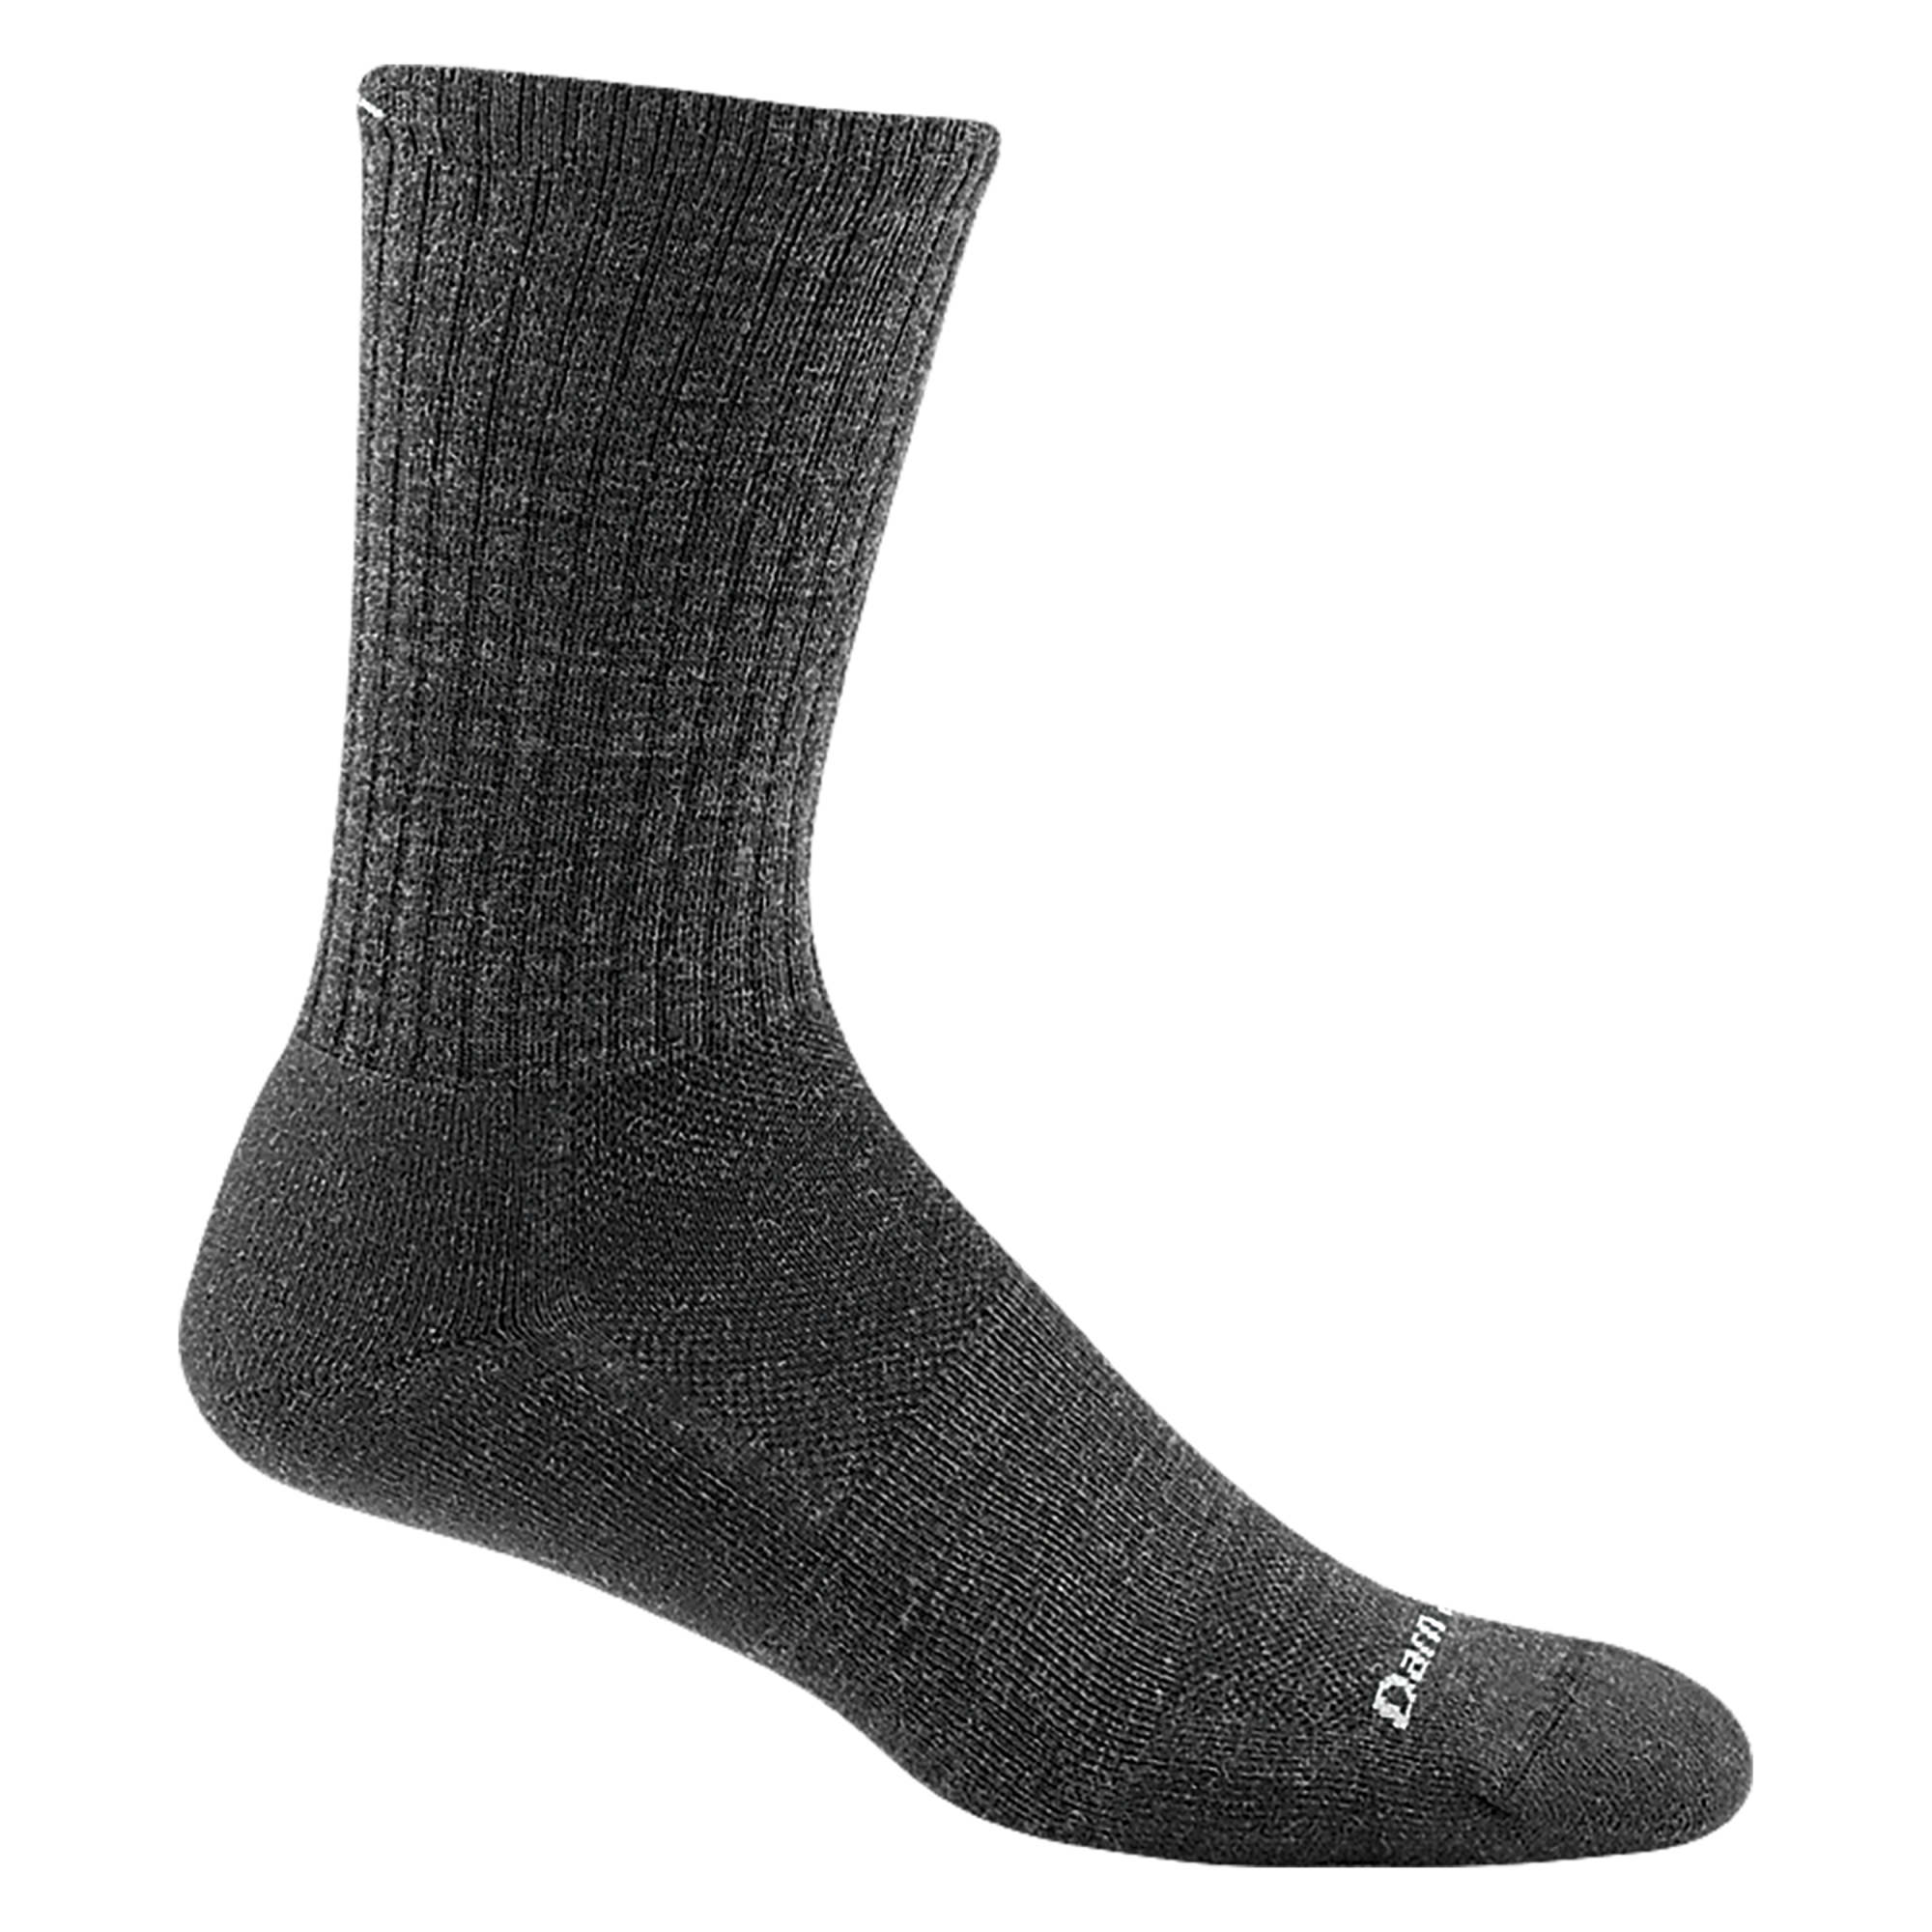 1657 men's the standard crew lifestyle sock in color charcoal with white darn tough signature on forefoot